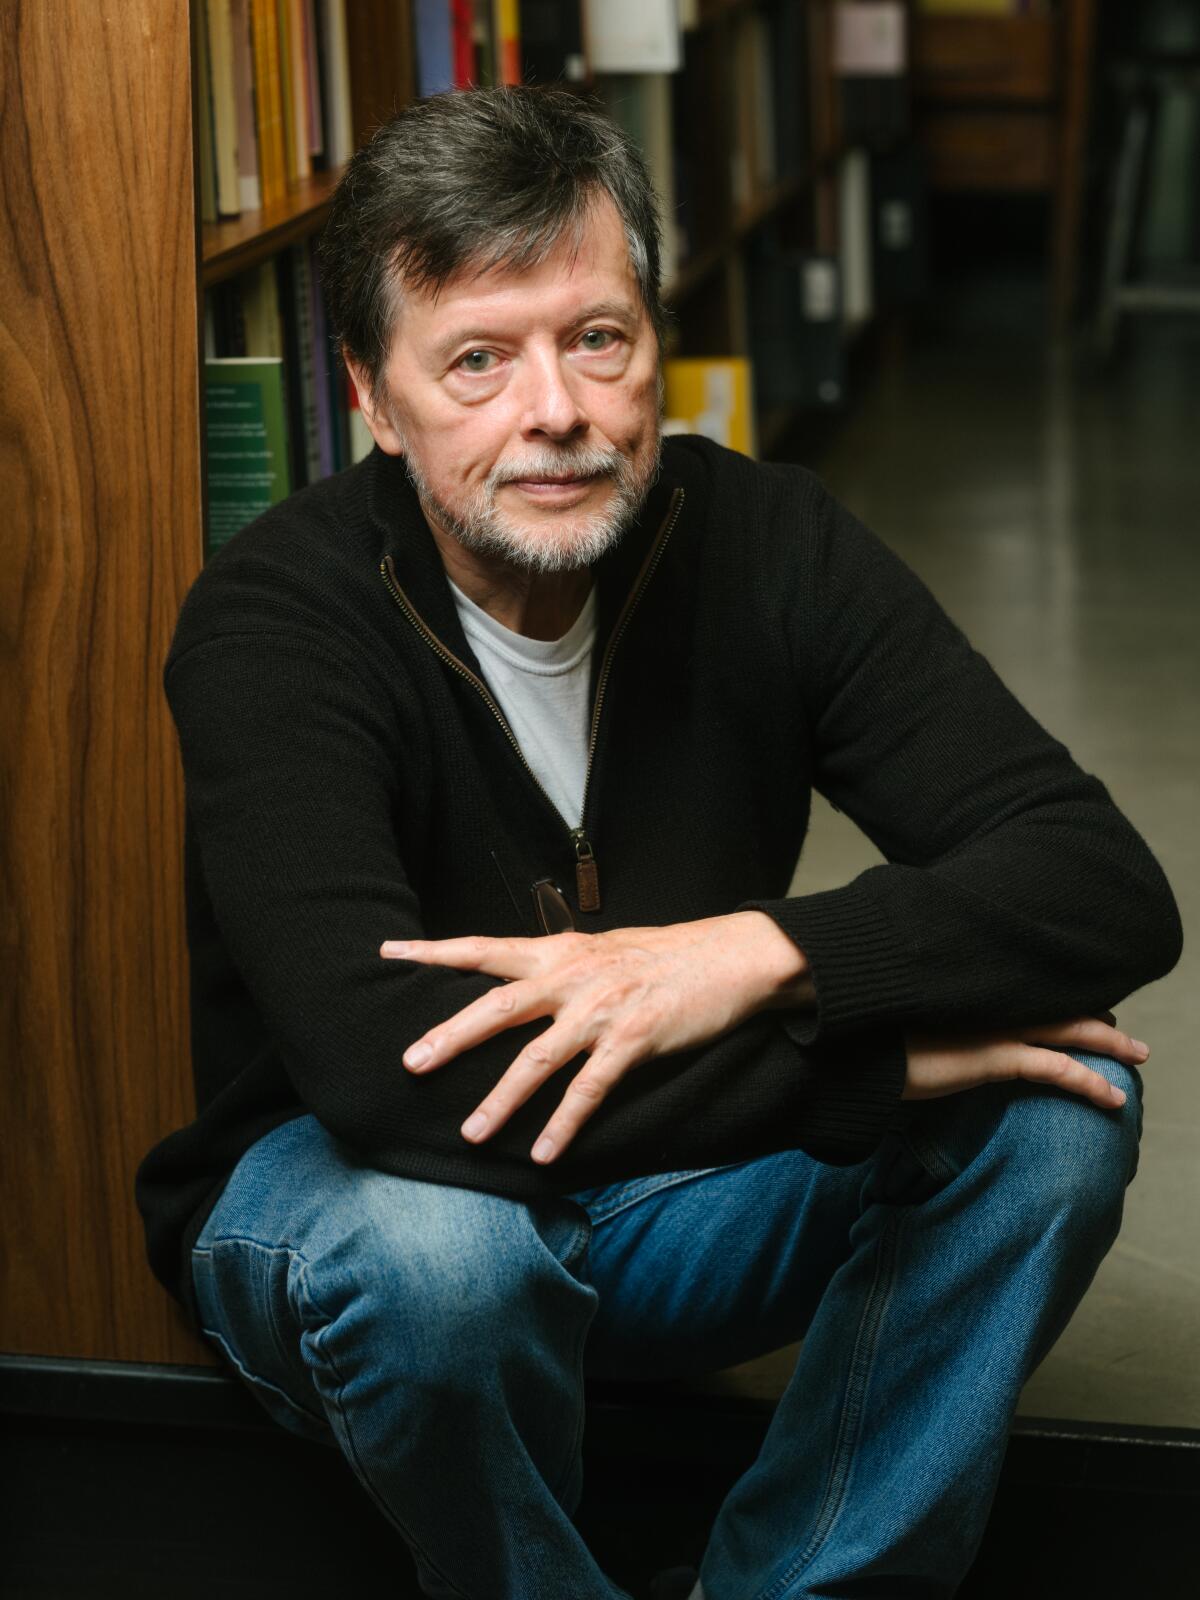 Documentarian Ken Burns in a black sweater and blue jeans, crouched by a shelf of books in a bookstore.